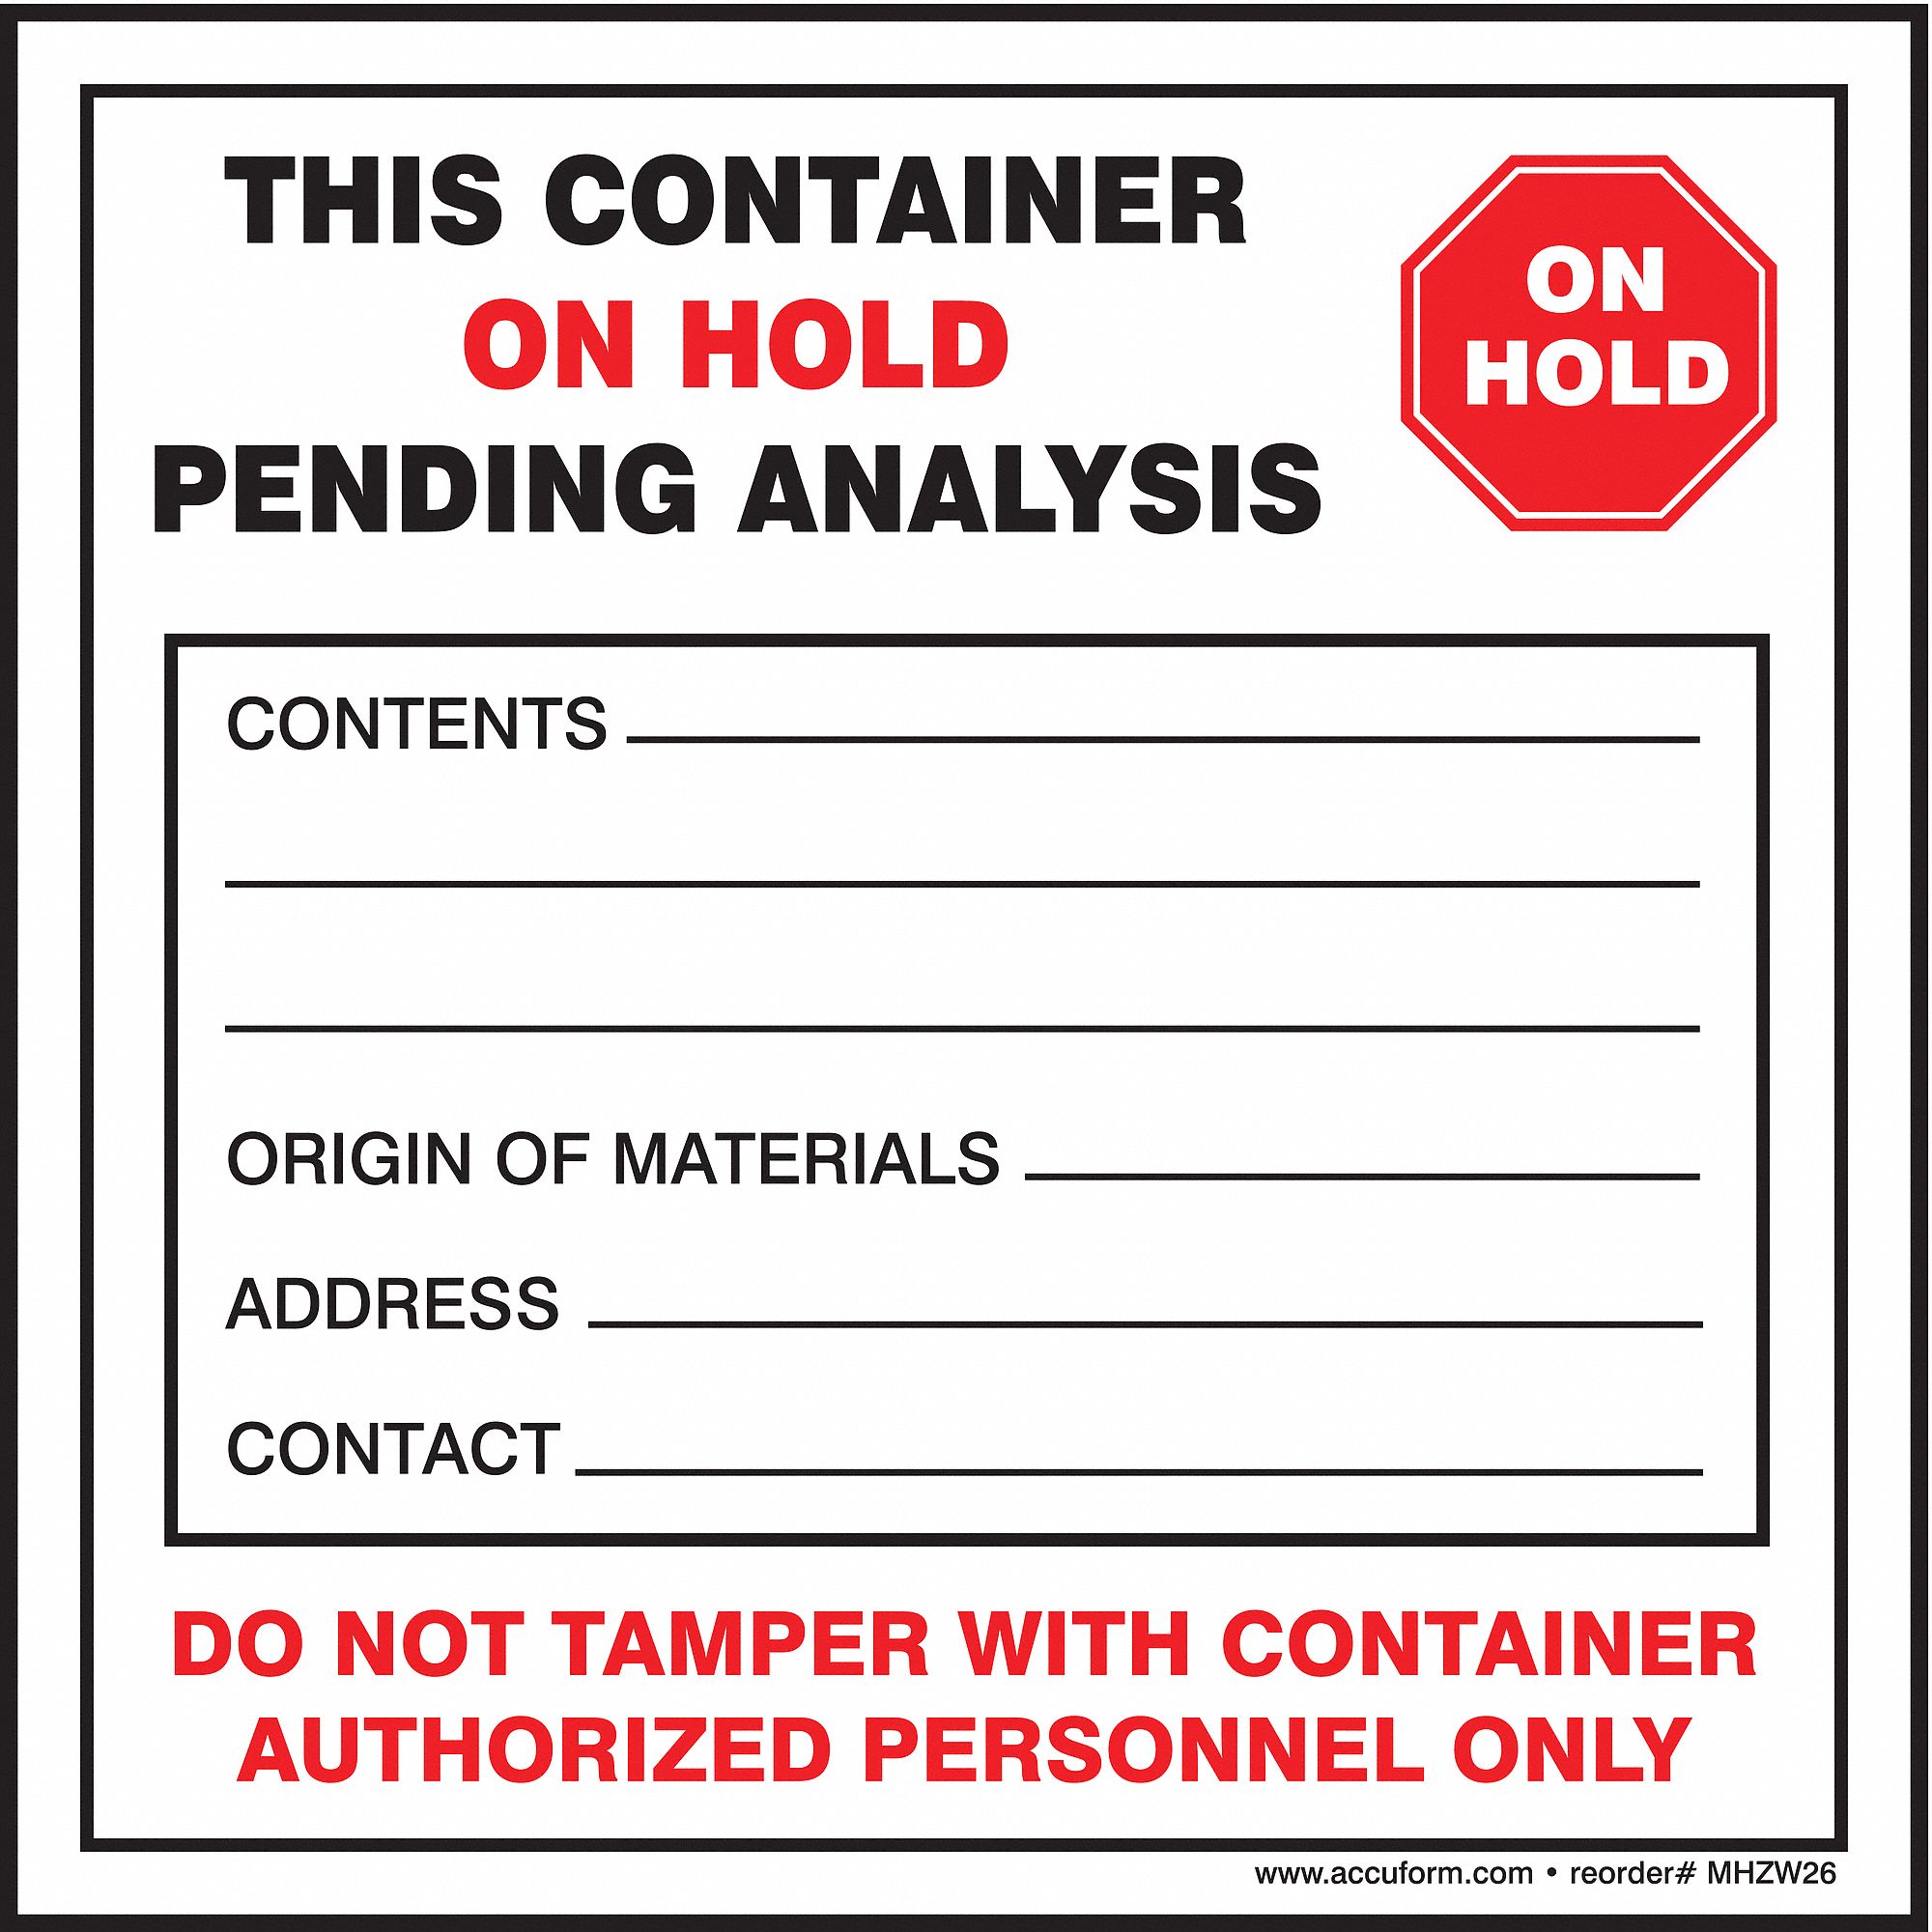 ACCUFORM SIGNS Paper Waste Label, 6" Height, 6" Width   Non Hazardous and Hazardous Waste Labels   9FDY5|MHZW26PSL